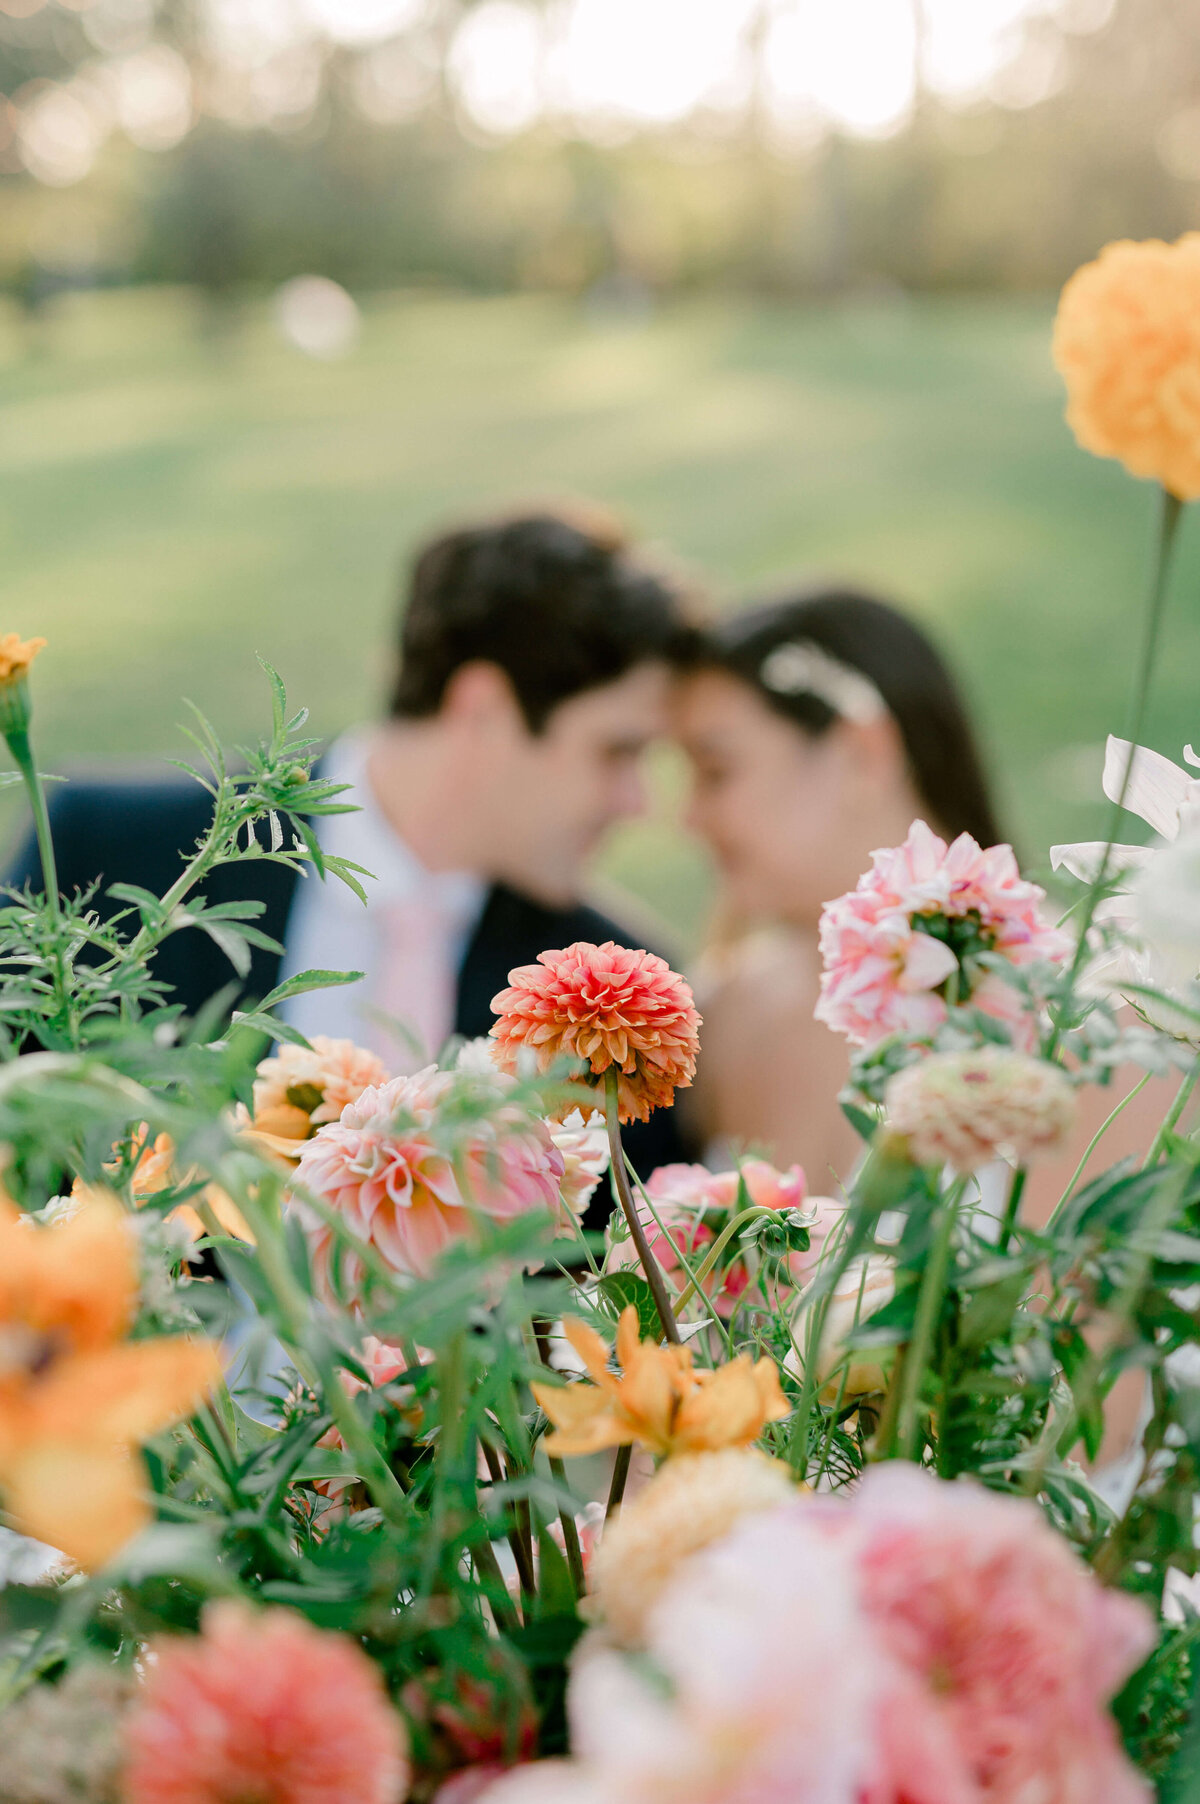 Couple resting forehead to forehead in the background with peach colored flowers in the foreground.